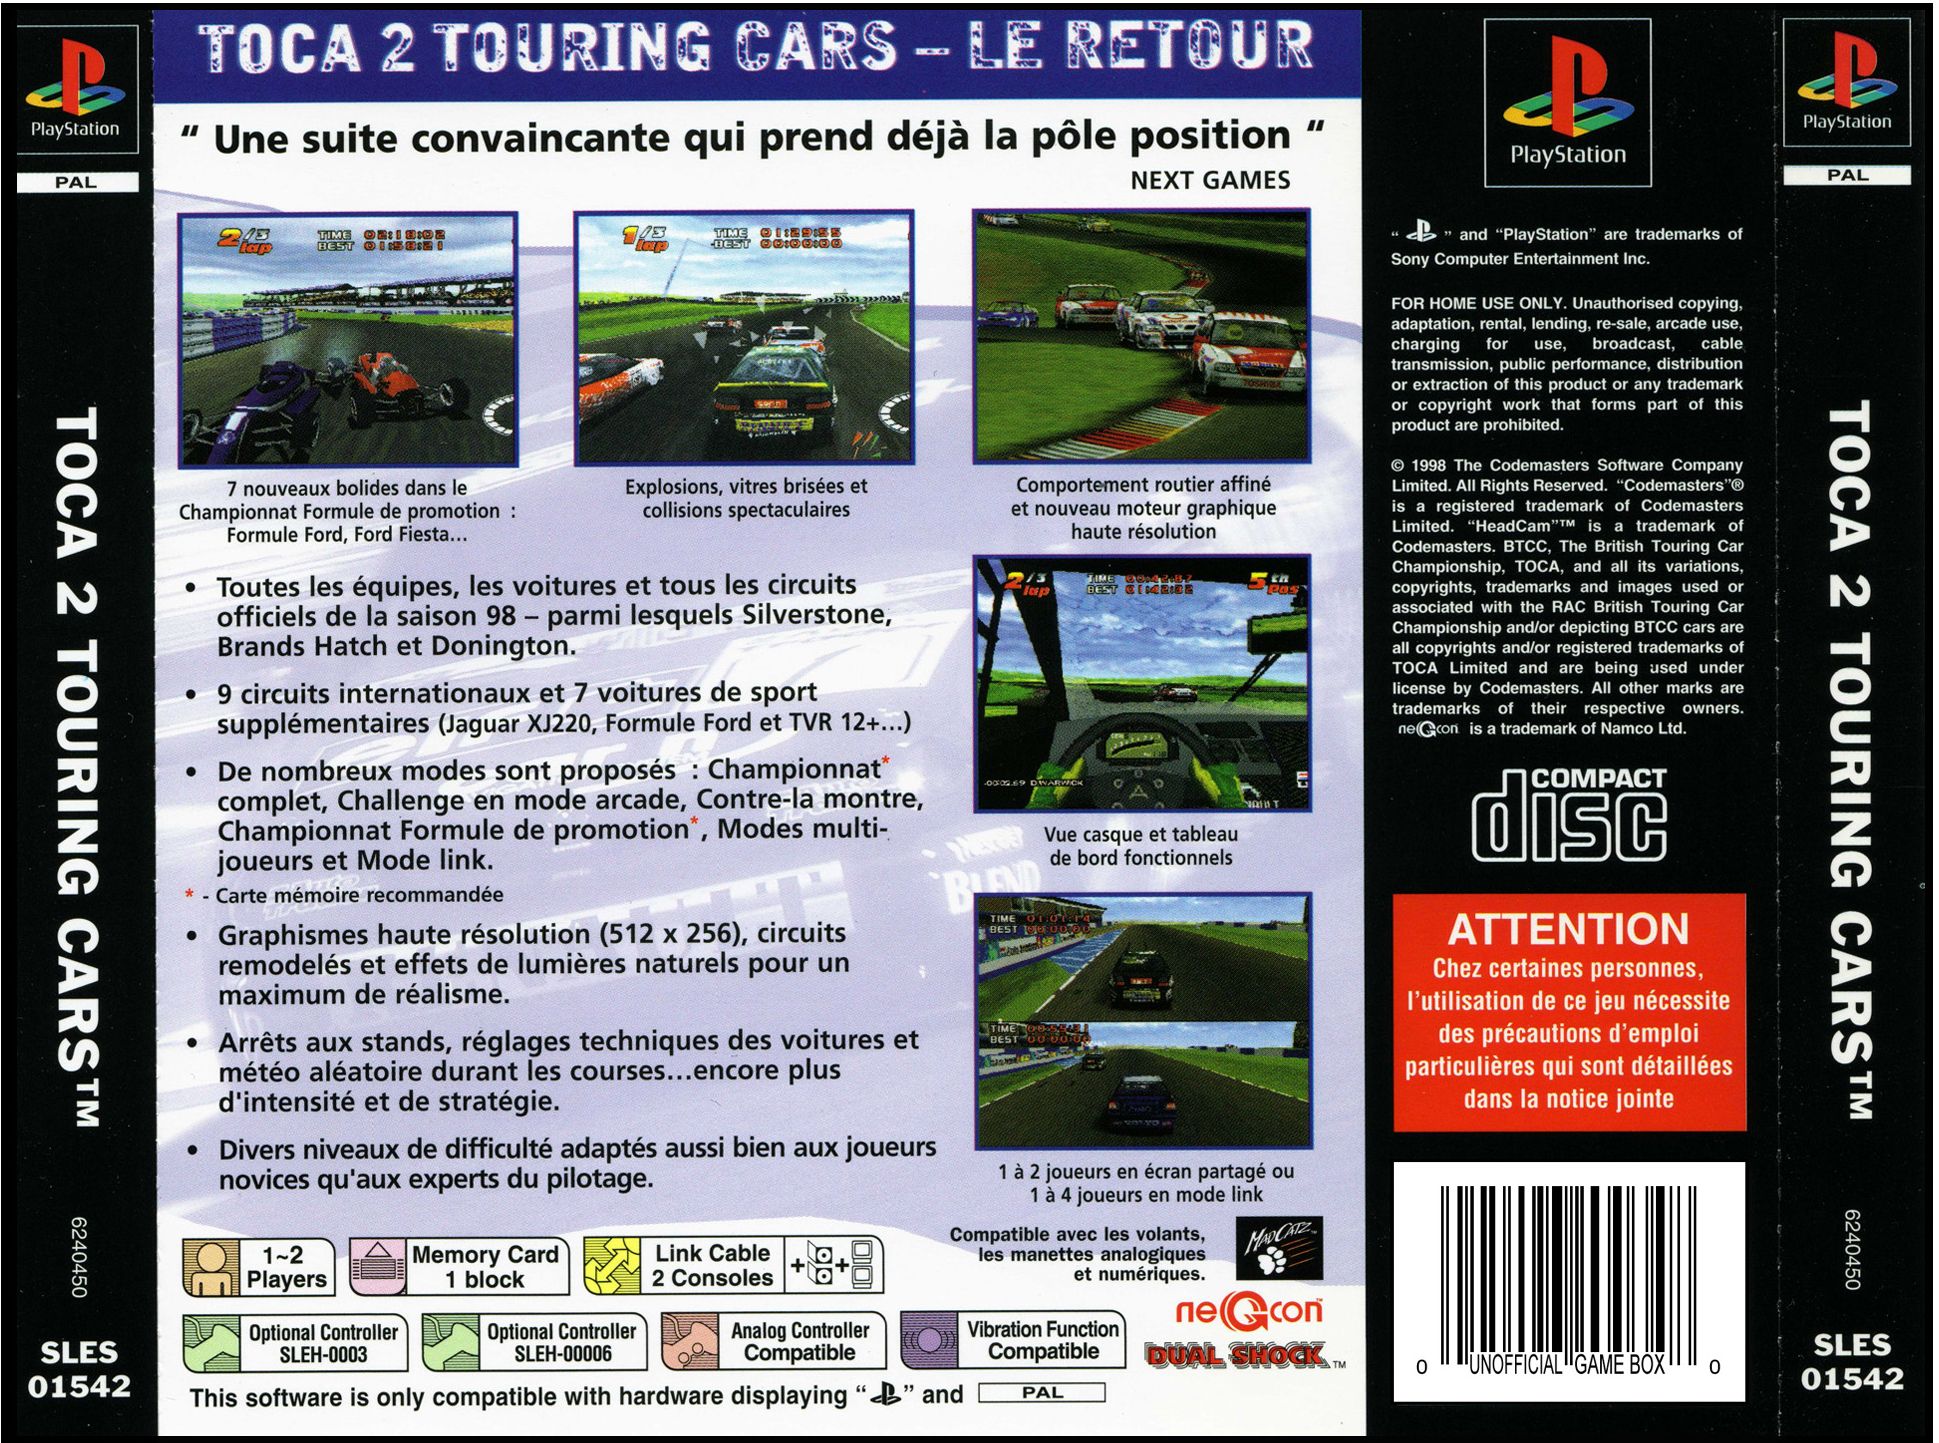 Toca 2 - Touring Cars PSX cover